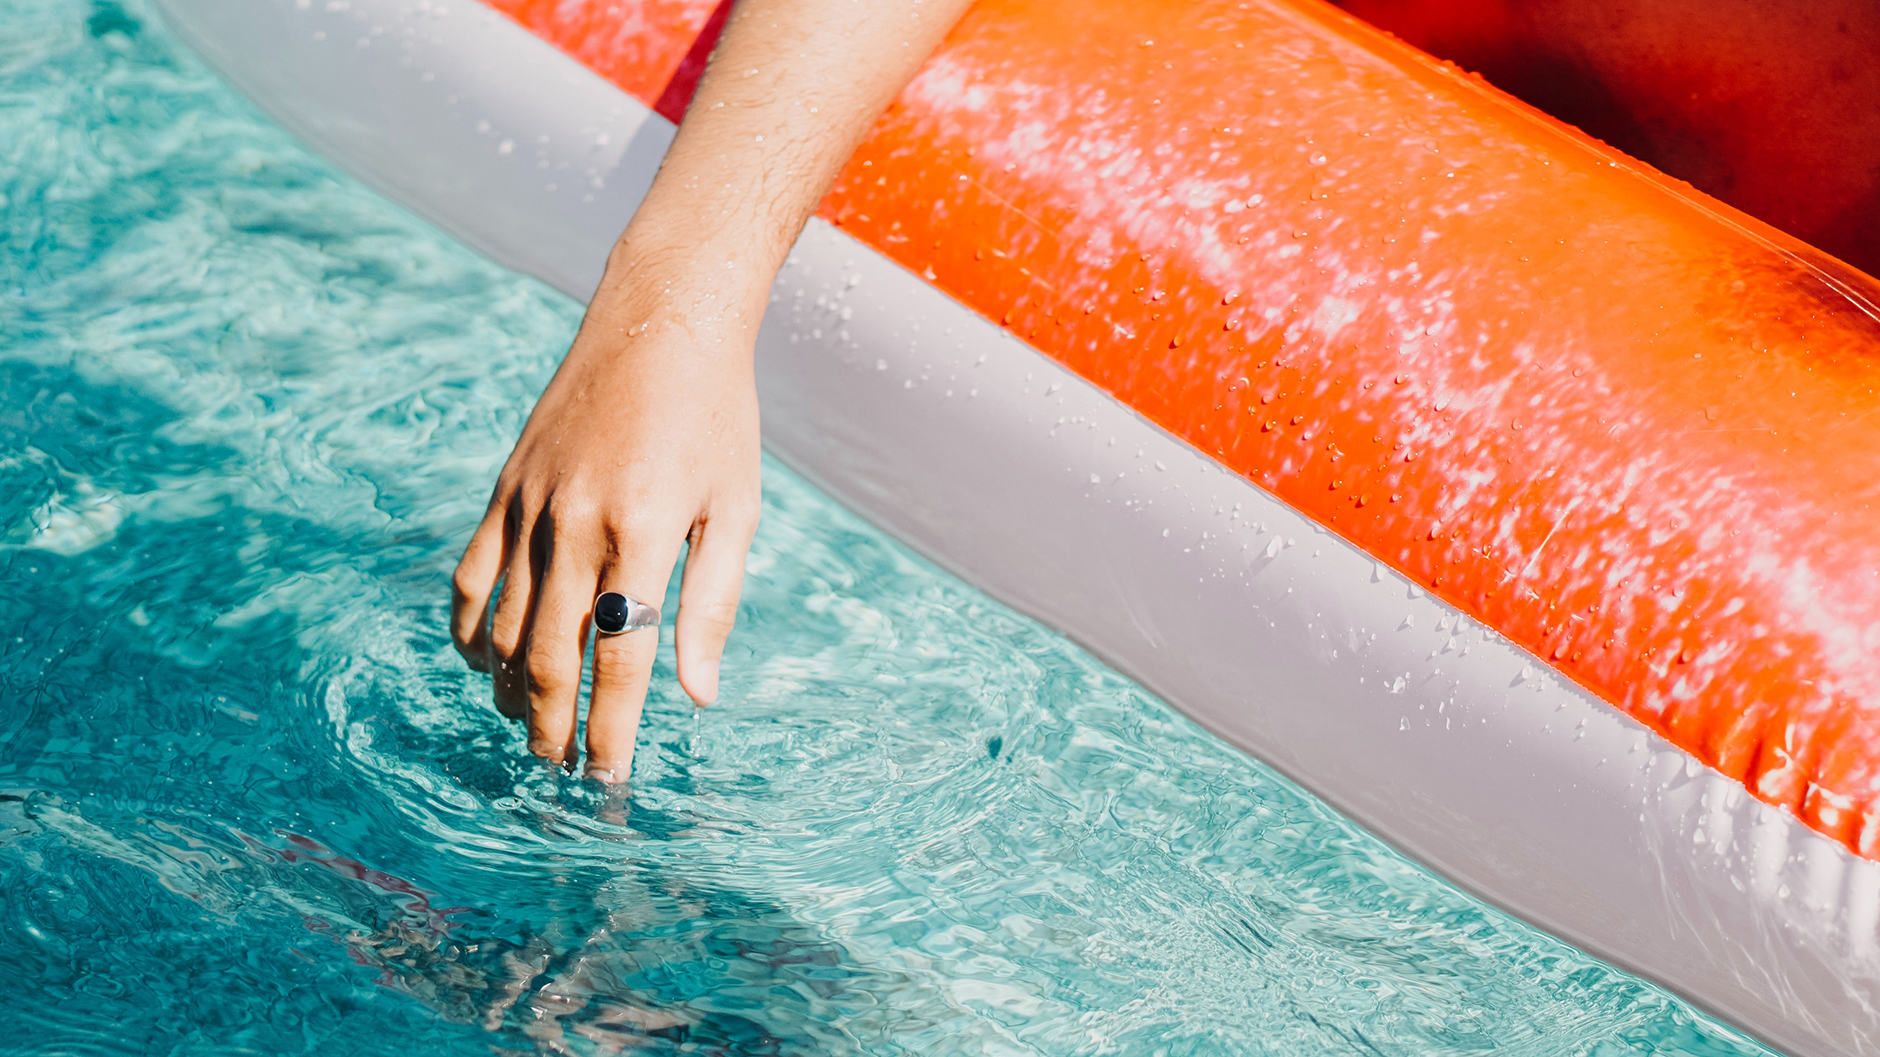 close up of hand dangling in pool water as person relaxes in an orange pool float